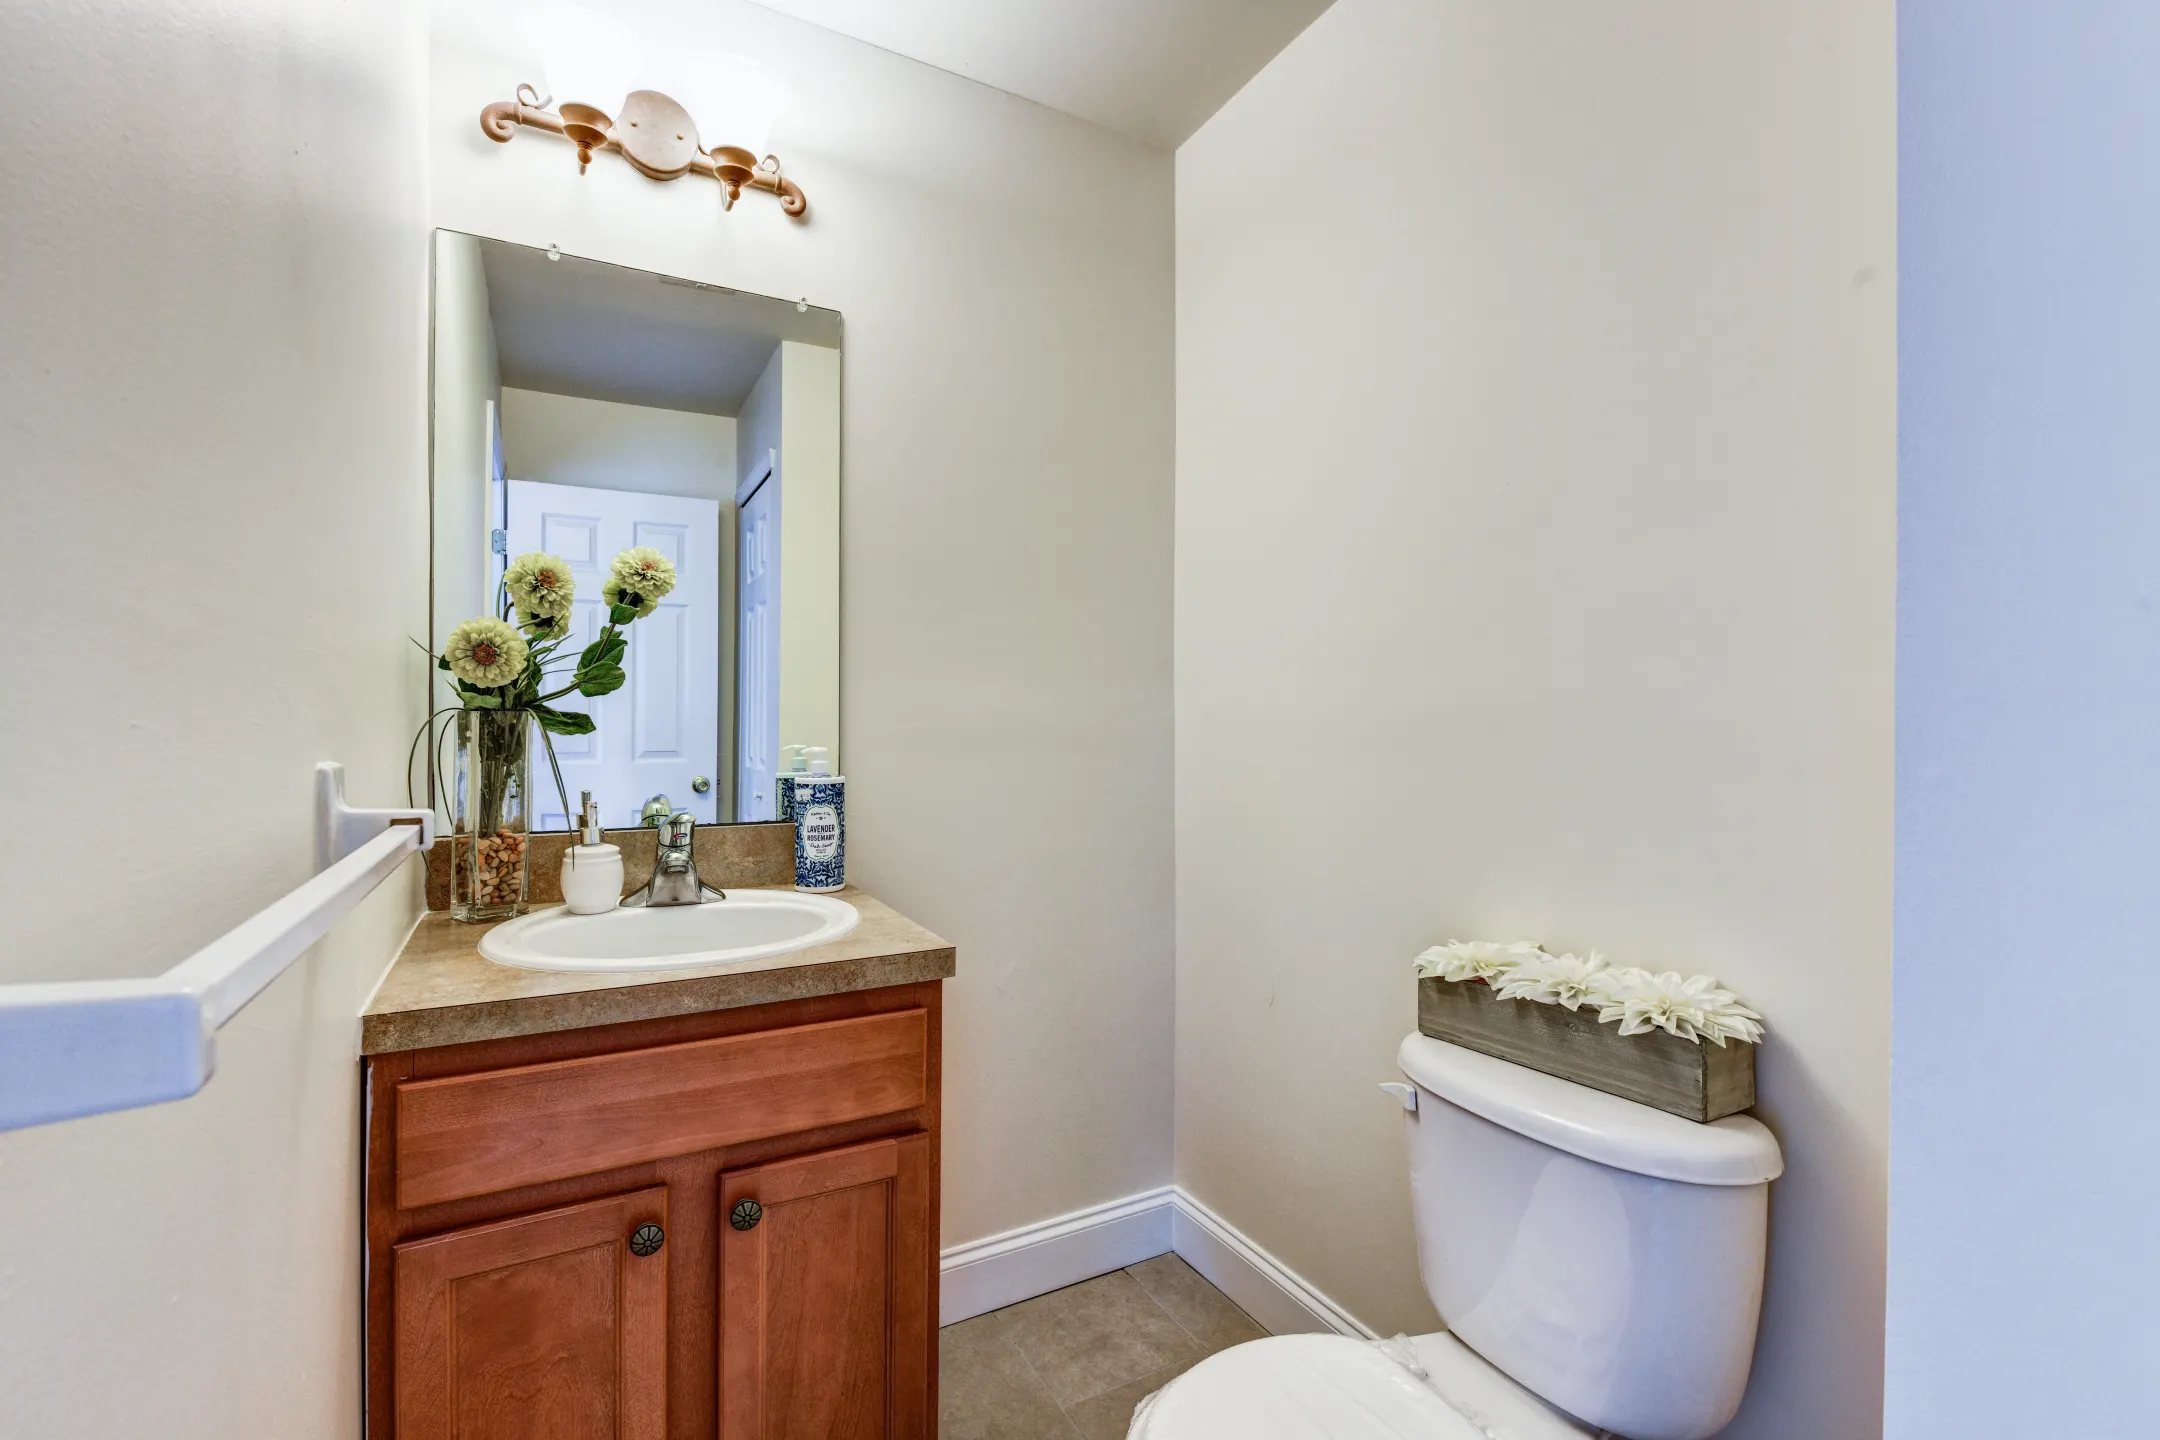 Bathroom - Townline Townhomes - Blue Bell, PA